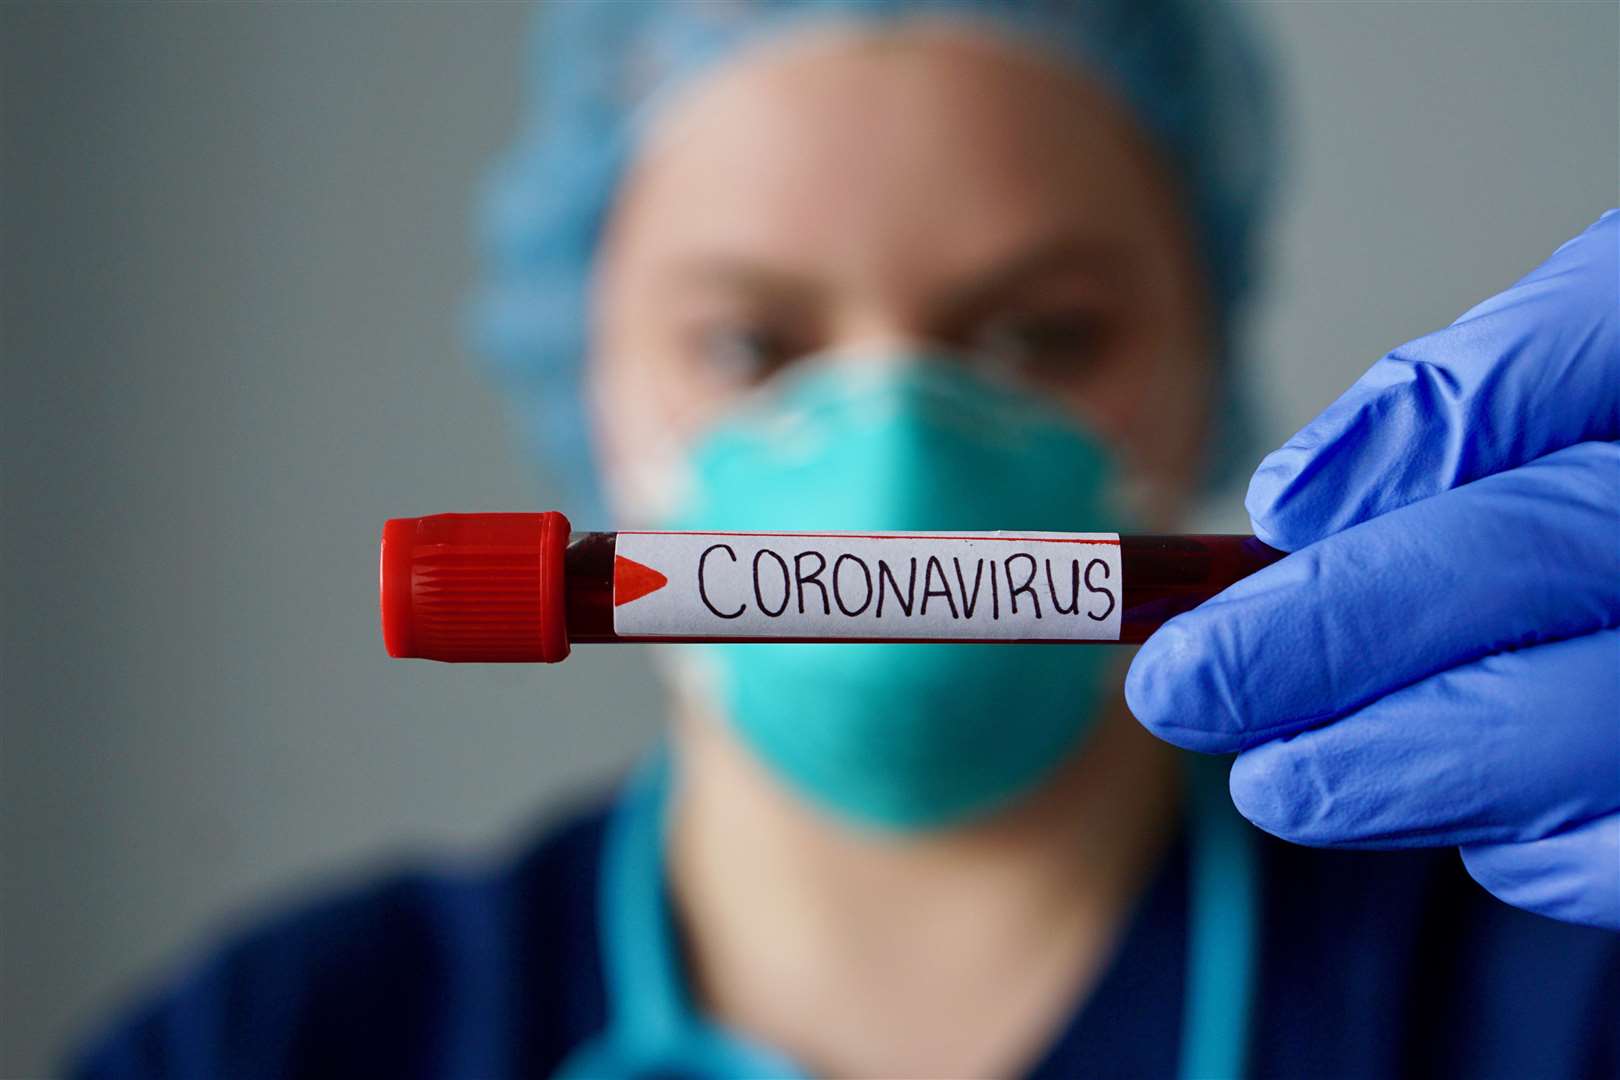 There have been several confirmed cases of coronavirus in the UK